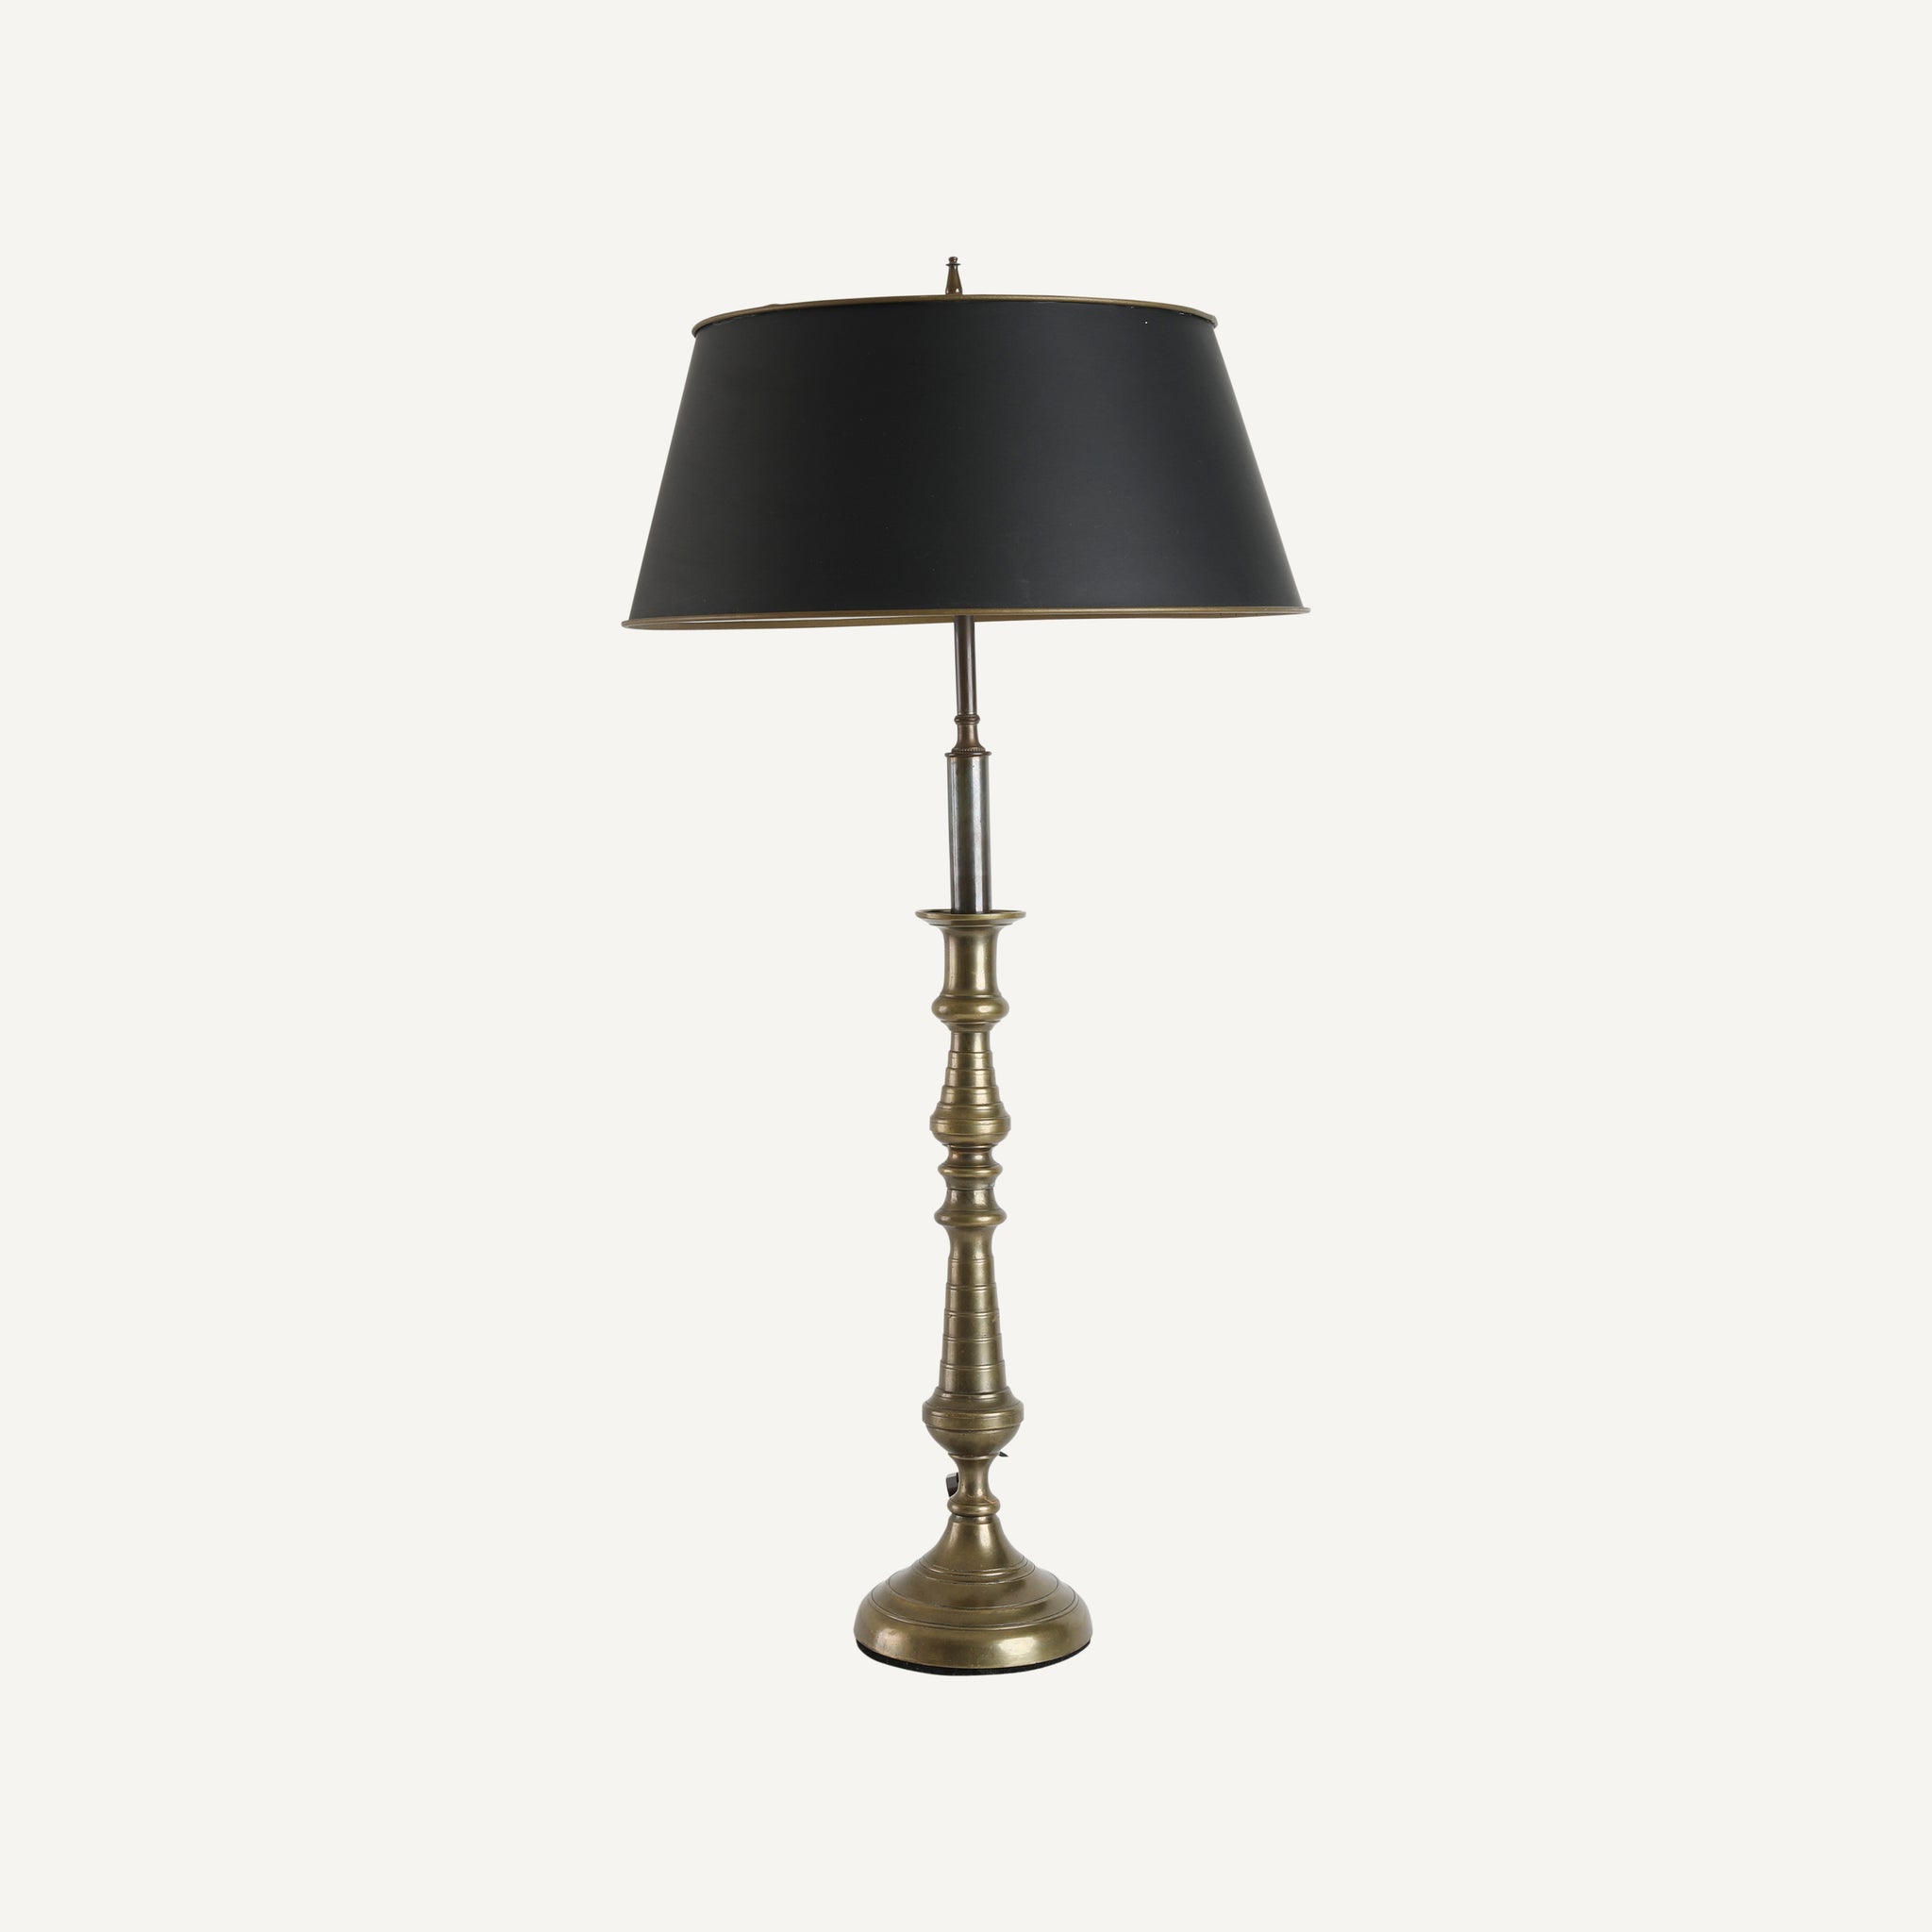 ANTIQUE BRASS LAMP WITH BLACK PAPER SHADE